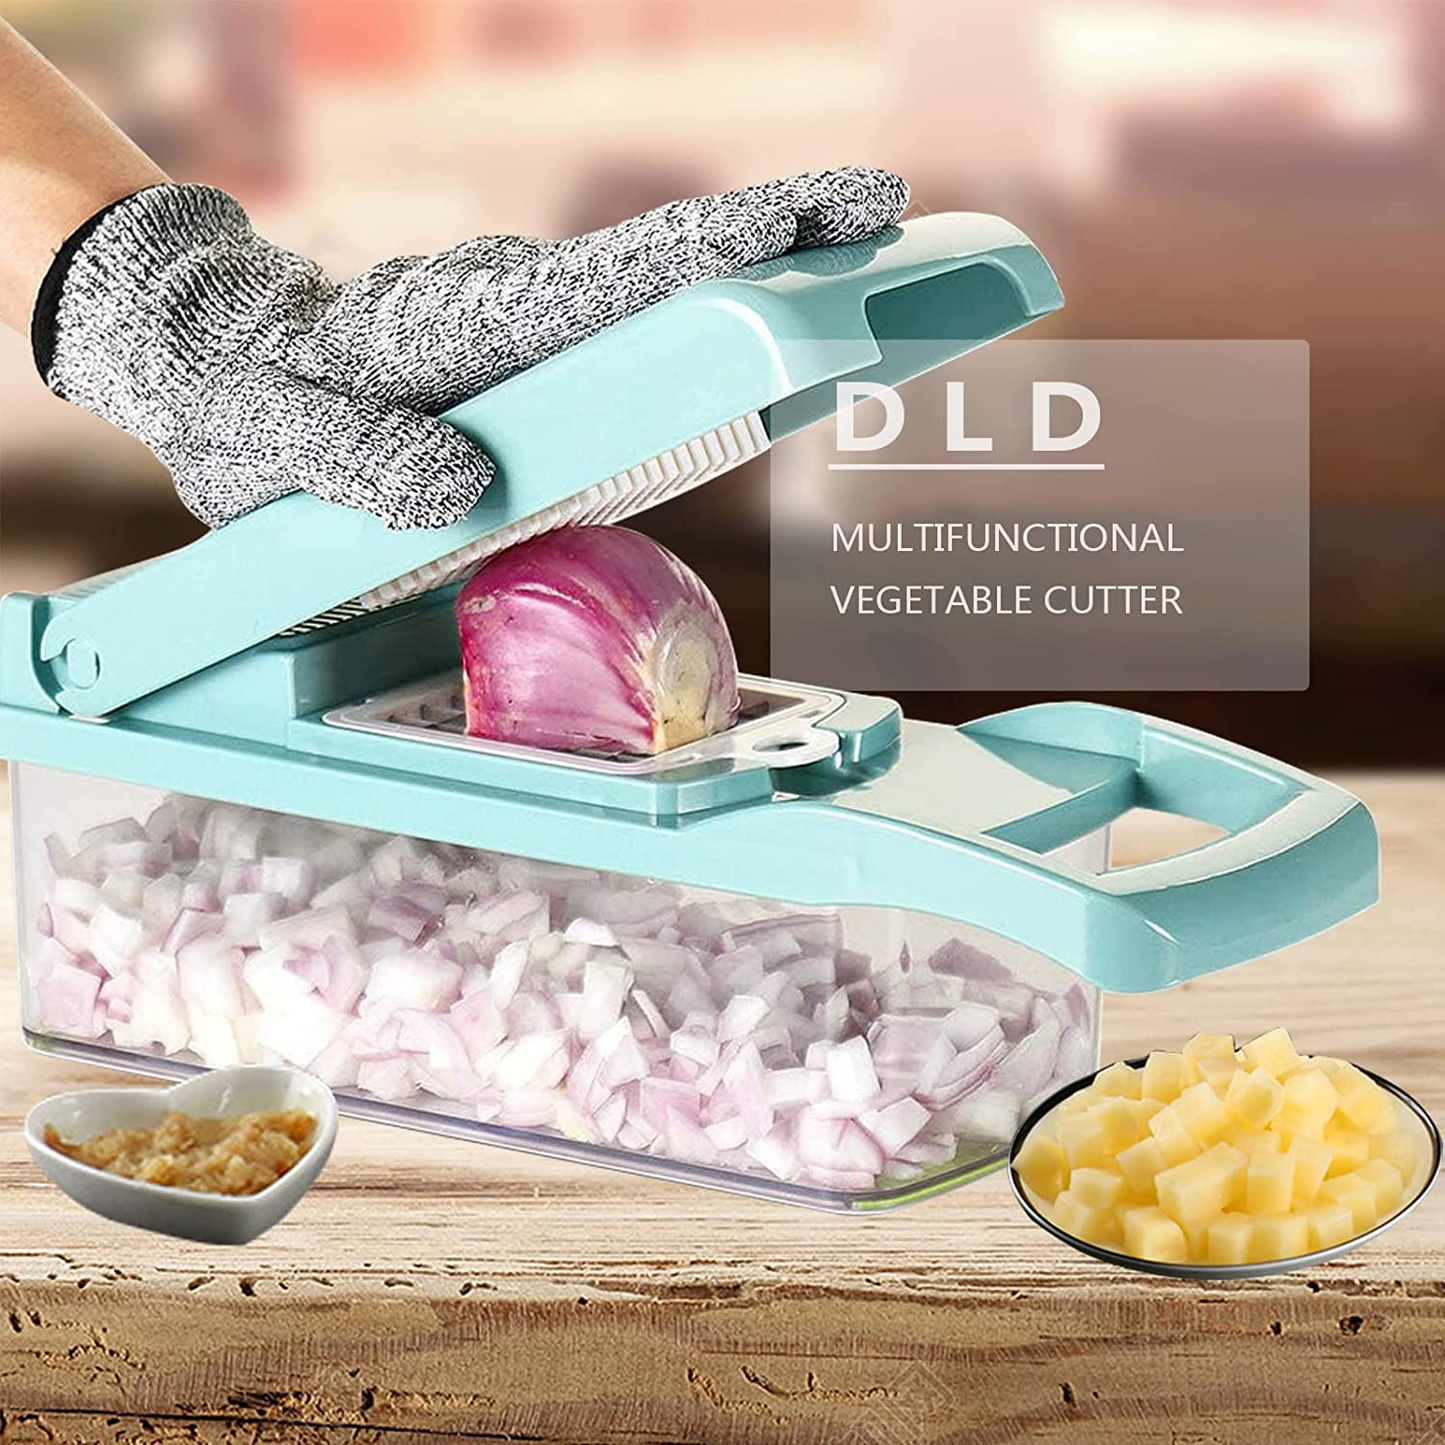 12-in-1 Multifunctional Mandoline Vegetable Chopper Slicer, Vegetable Chopper, Pro Food Chopper Vegetable Cutter and Dicers, Onion Chopper with Container, Vegetable Slicer and Chopper for - 7 Blades